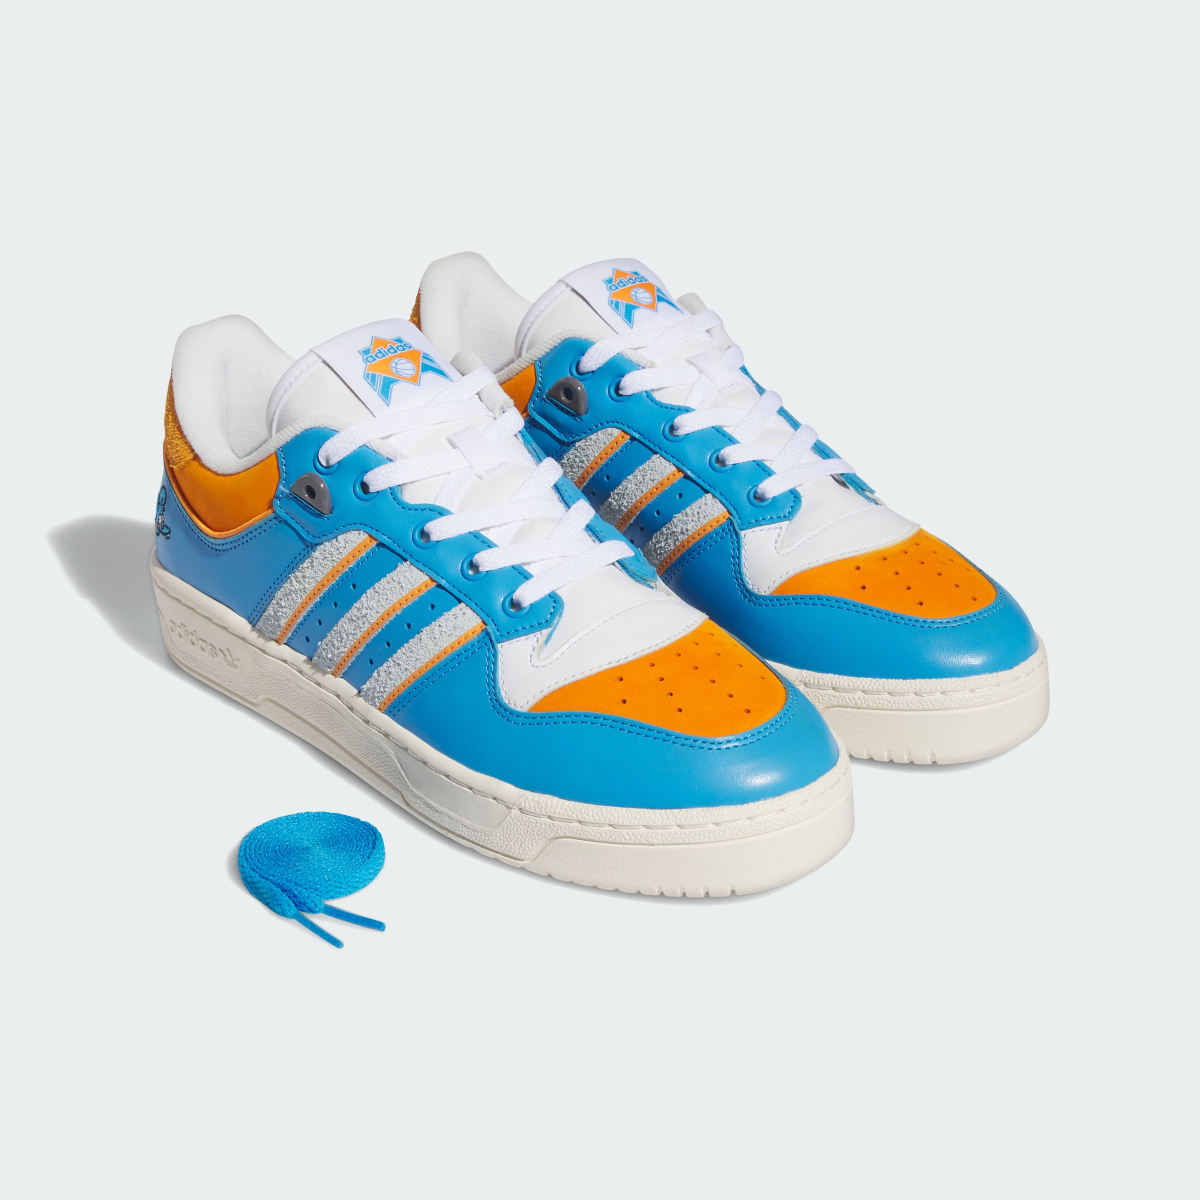 Adidas Sapatilhas adidas Rivalry Low Itchy. 12